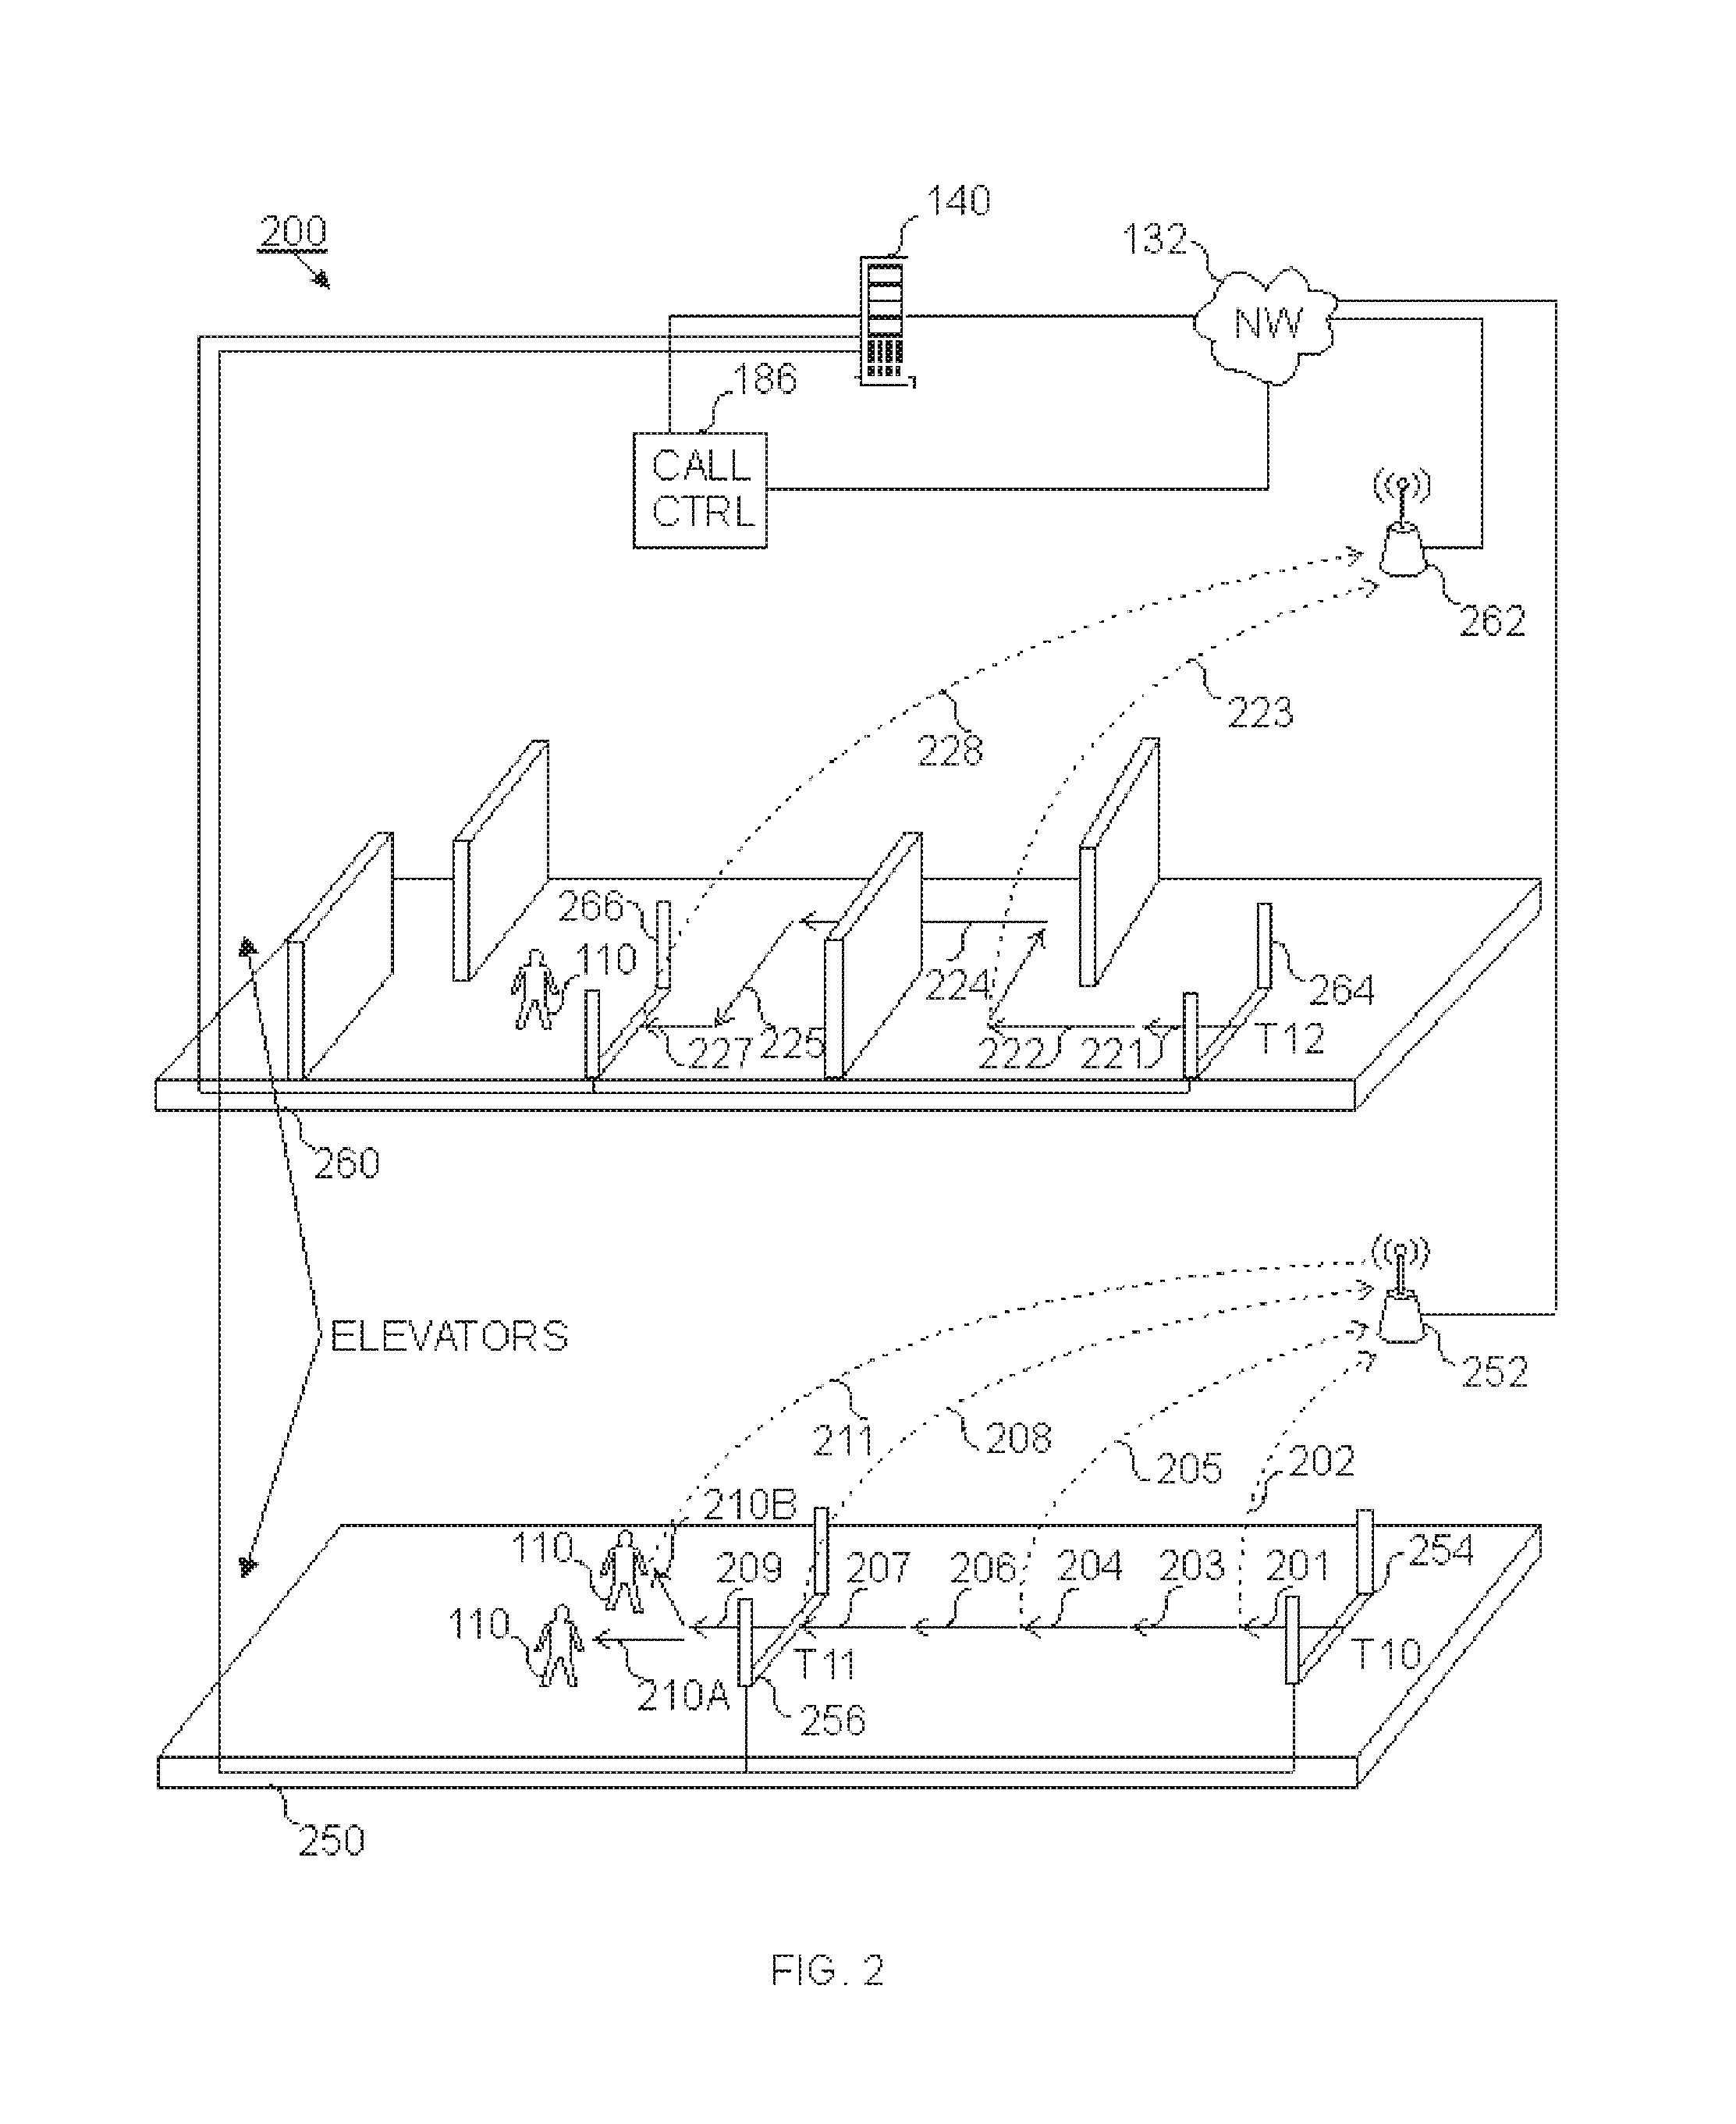 System and a method for elevator allocation based on a determination of walker speed